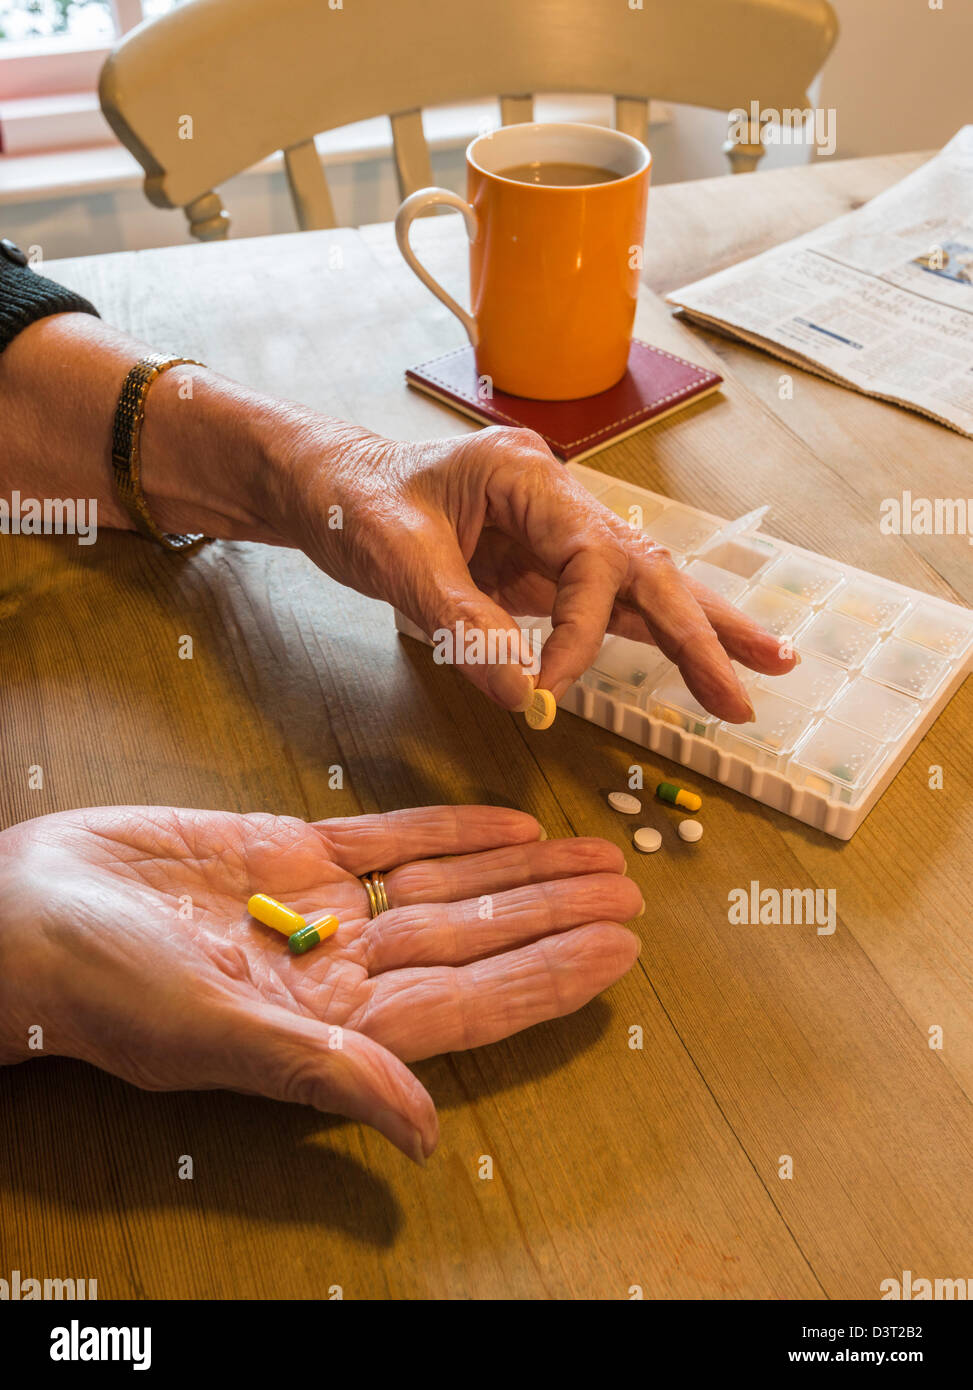 WOMAN AT TABLE WITH PILLBOX TAKING MEDICINE SORTING PILLS UK Stock Photo